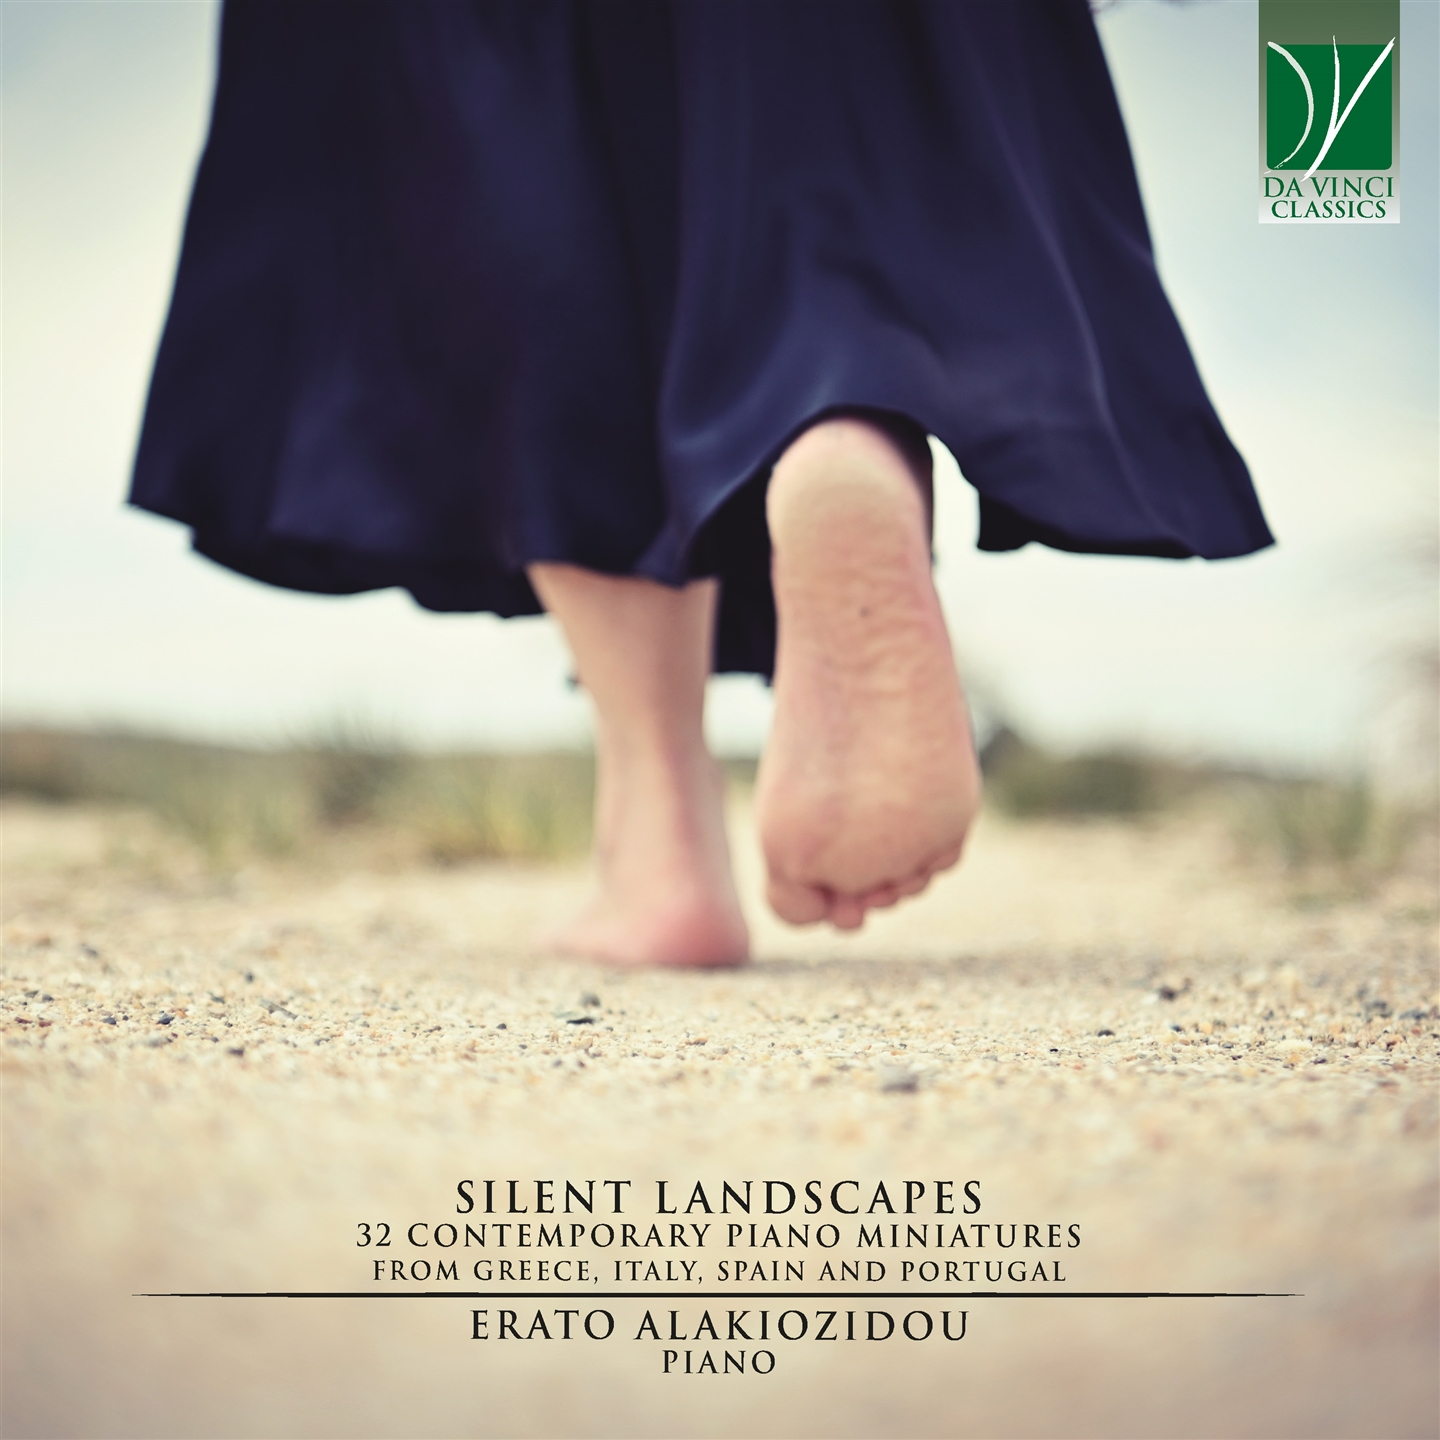 SILENT LANDSCAPES - 32 CONTEMPORARY PIANO MINIATURES FROM GREECE, ITALY, SPAIN